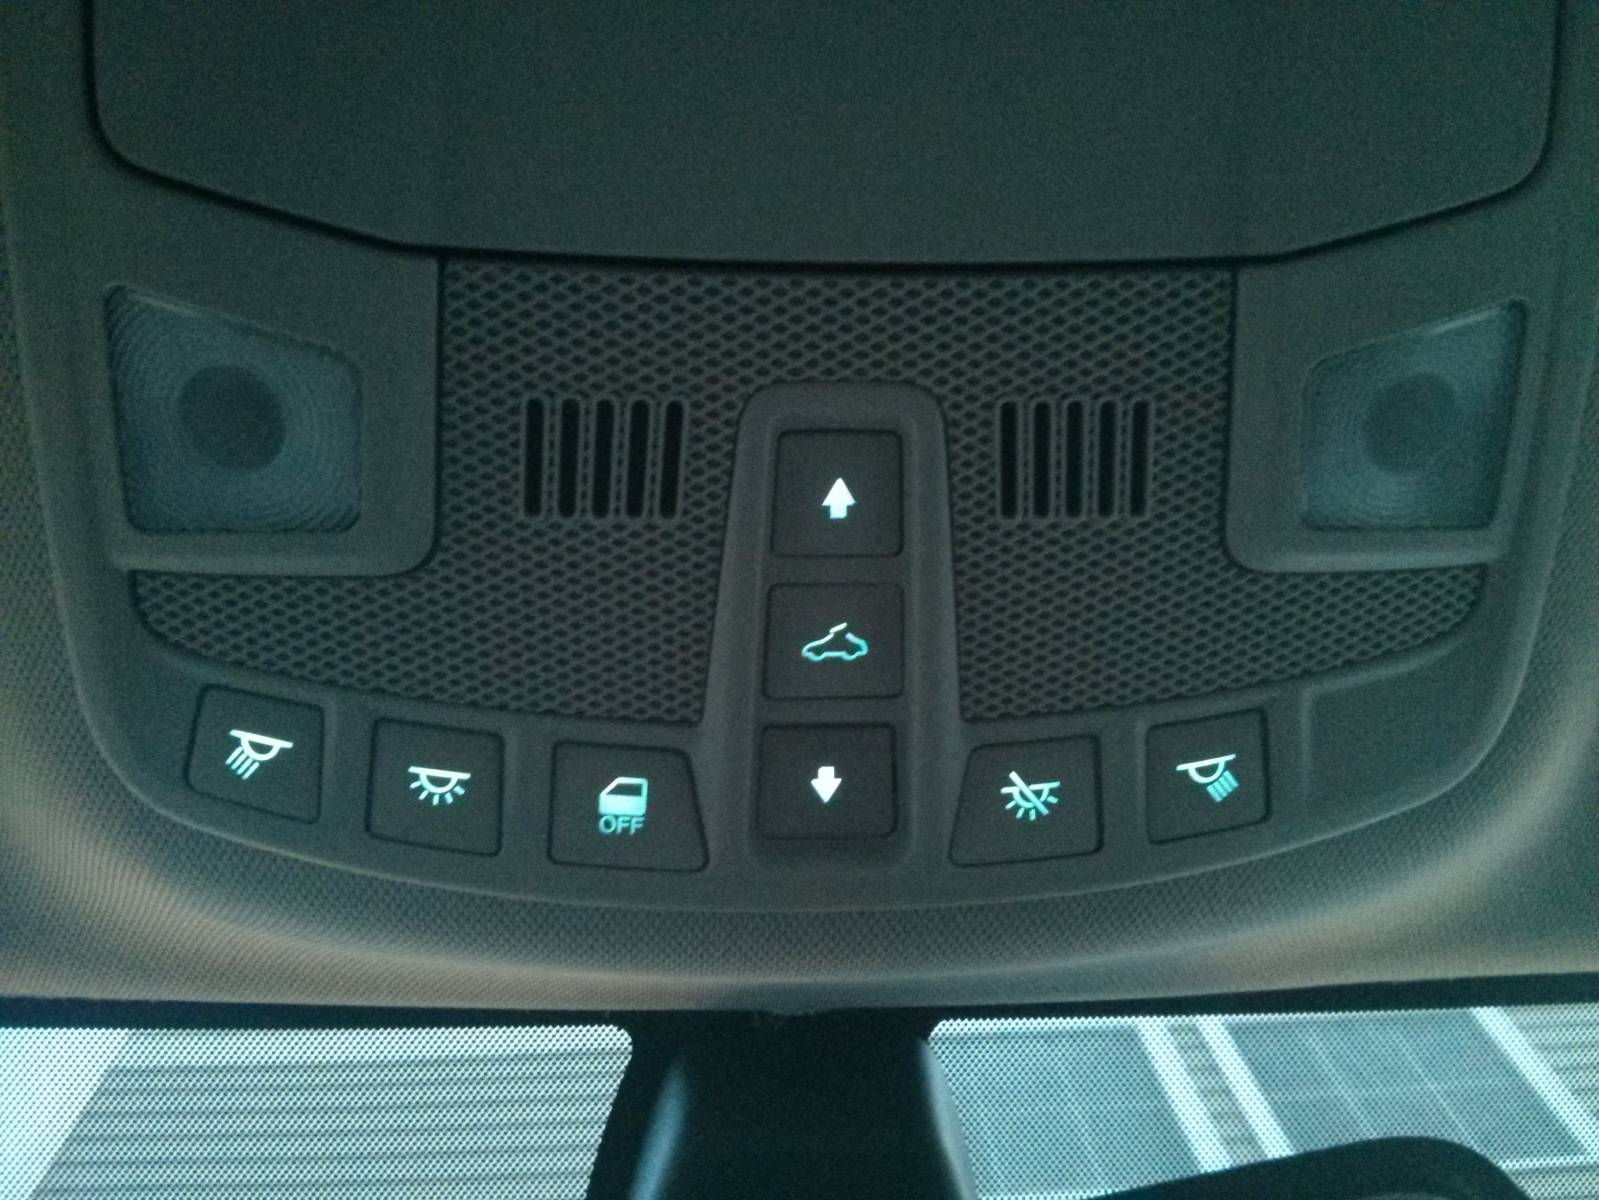 Moonroof buttons